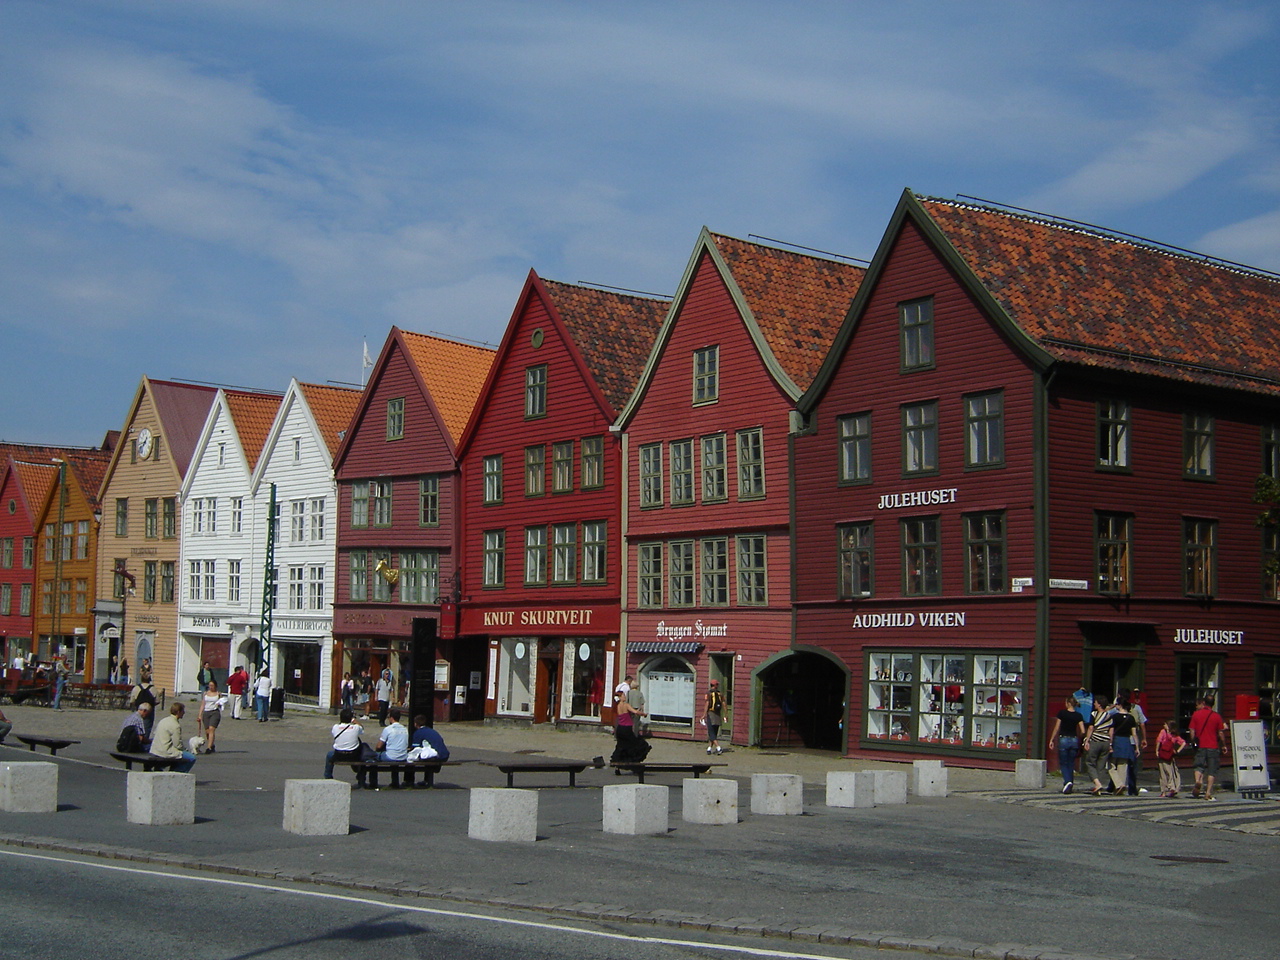 Bryggen is a row of Hanseatic trading buildings in Bergen, Norway. The buildings have been on the UNESCO World Heritage List since 1979 (photo: Tomasz Halszka)